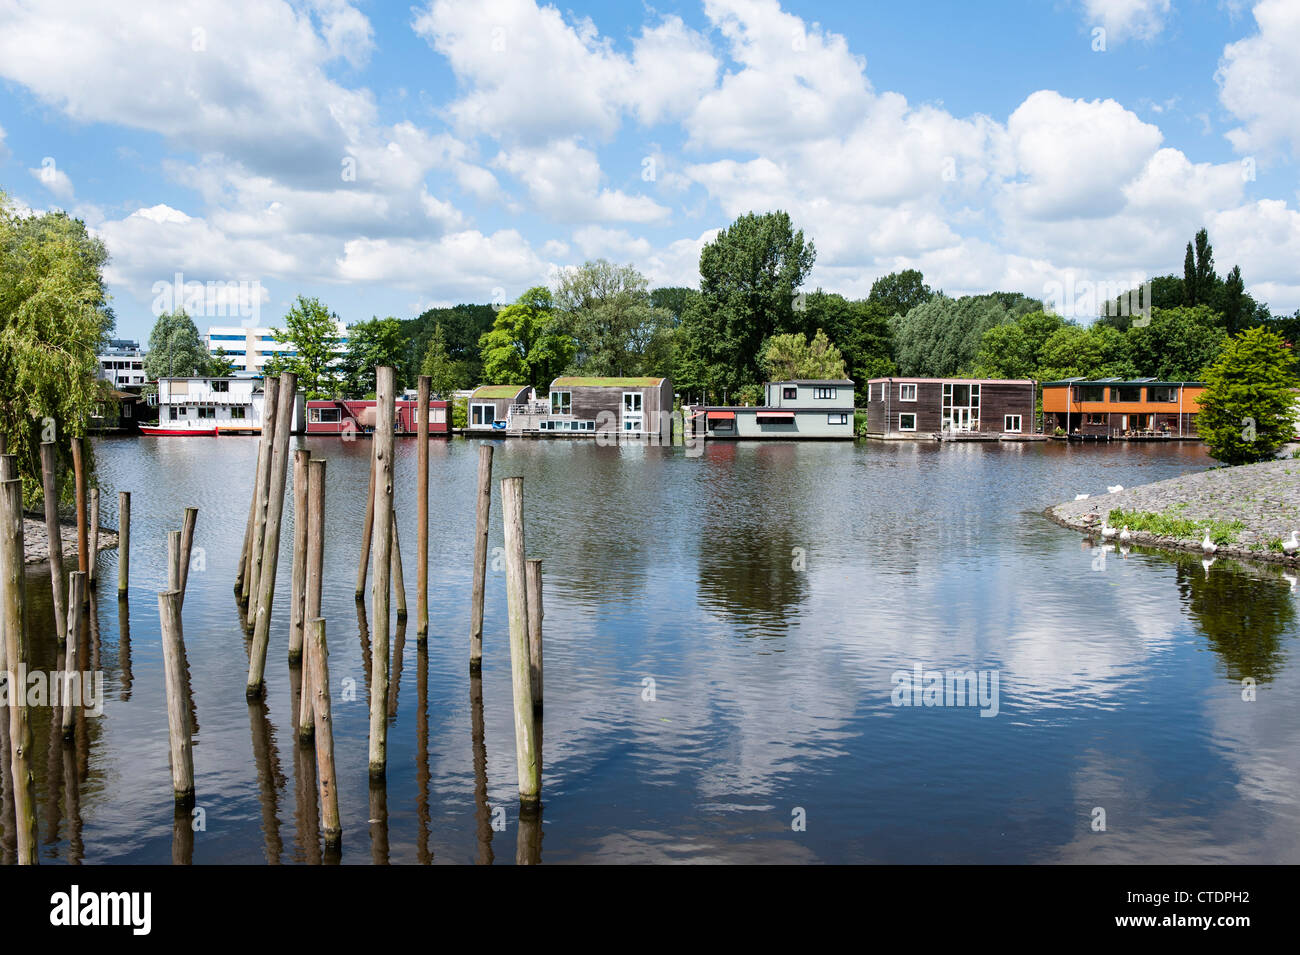 June 2012 Row of luxurious house boats along the Schinkel opposite the Olympic Stadium. Stock Photo